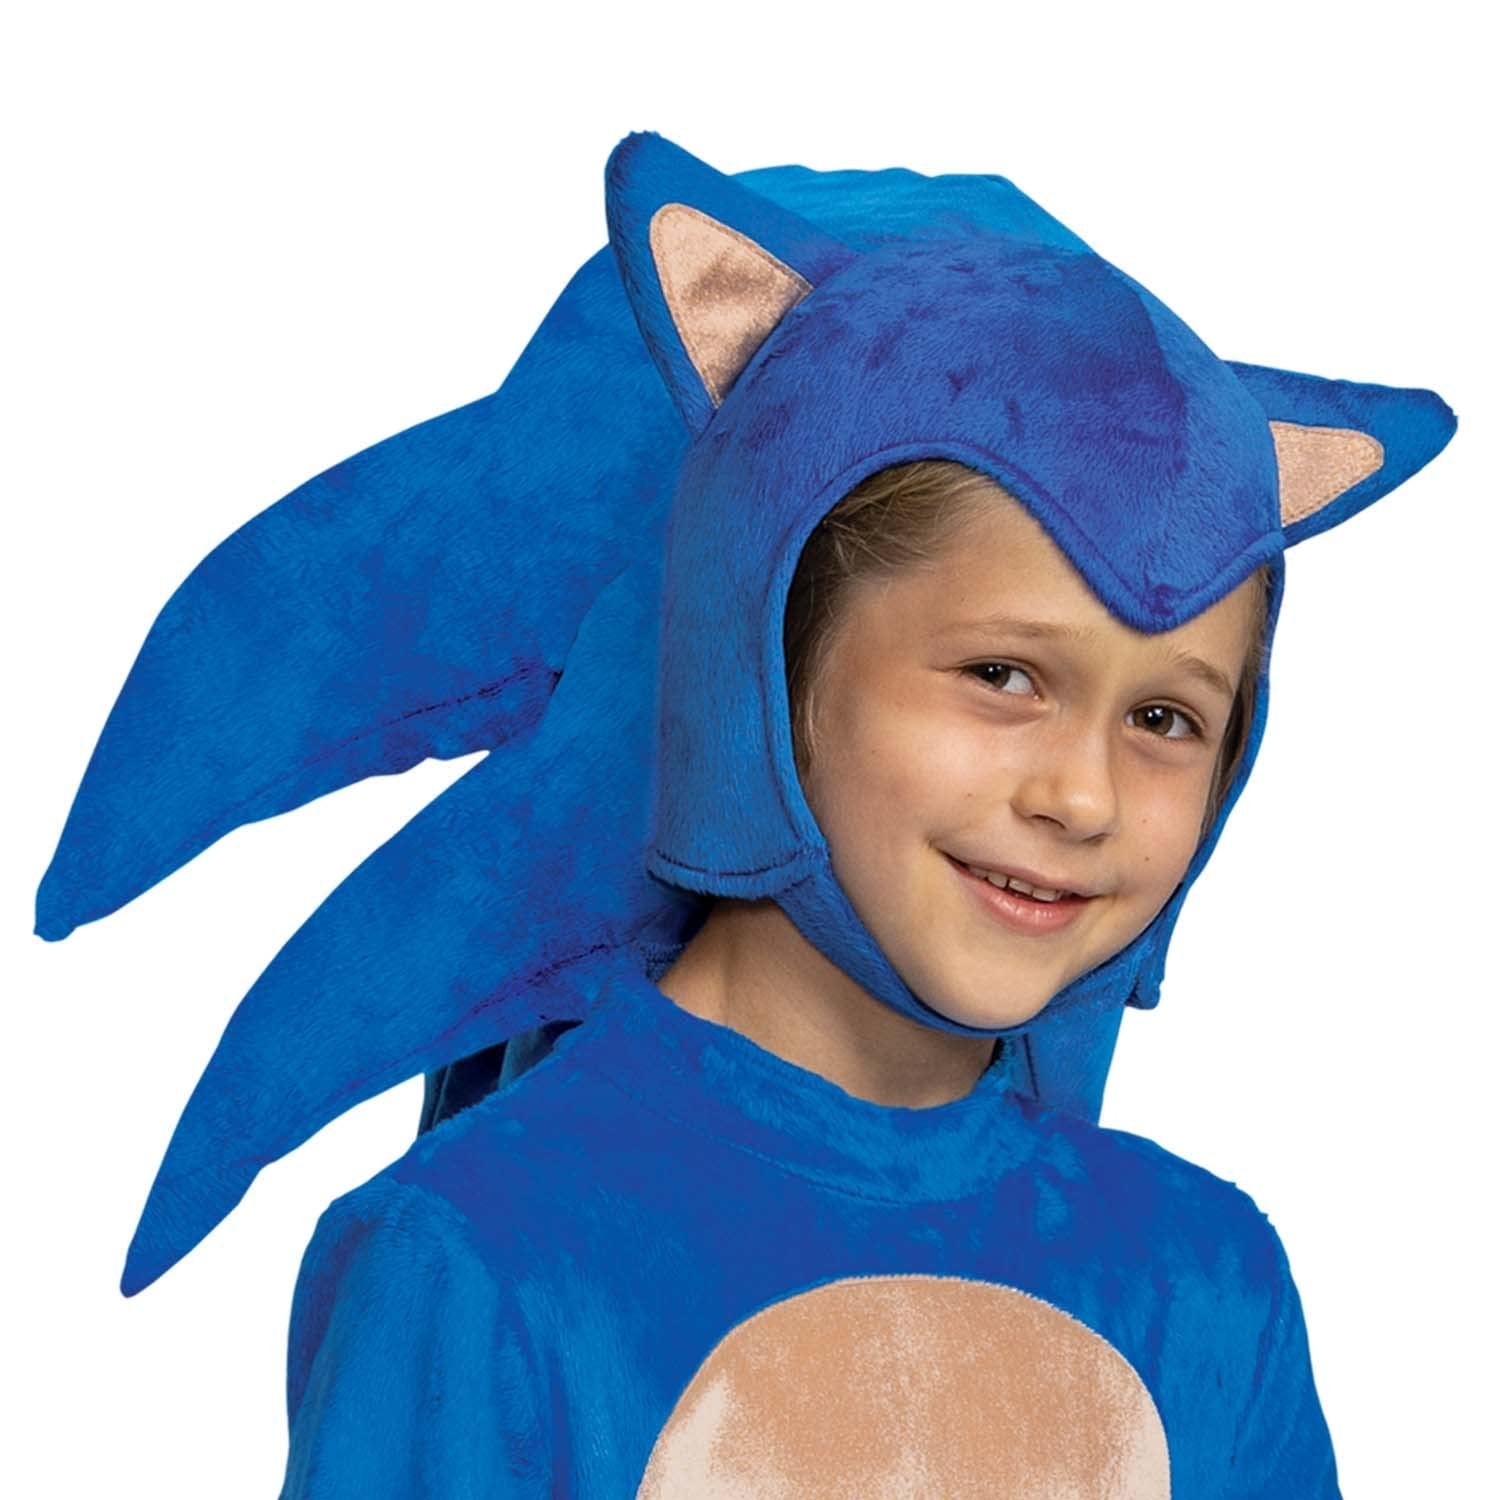 Sonic the Hedgehog Costume, Official Deluxe Sonic Movie Costume and Headpiece, Kids Size Small (4-6)